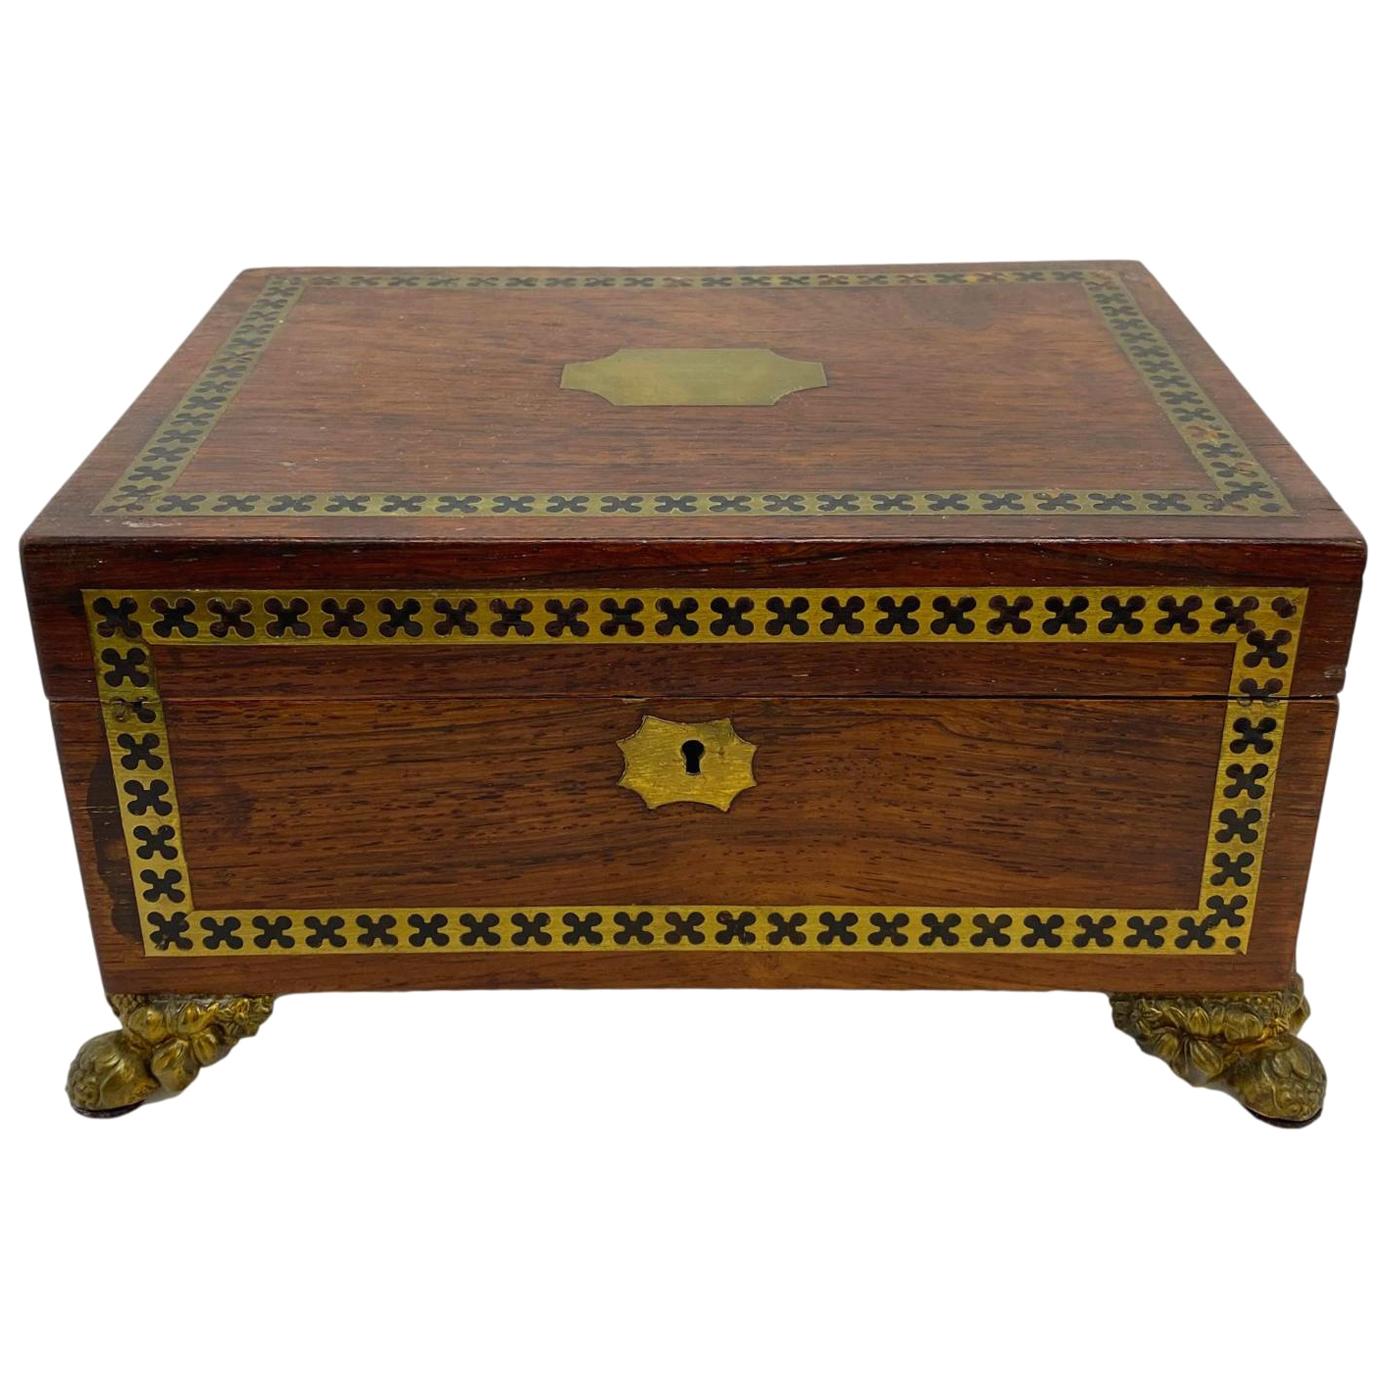 Antique Regency Box in Rosewood with Inlaid Ebony and Brass, English, circa 1820 For Sale